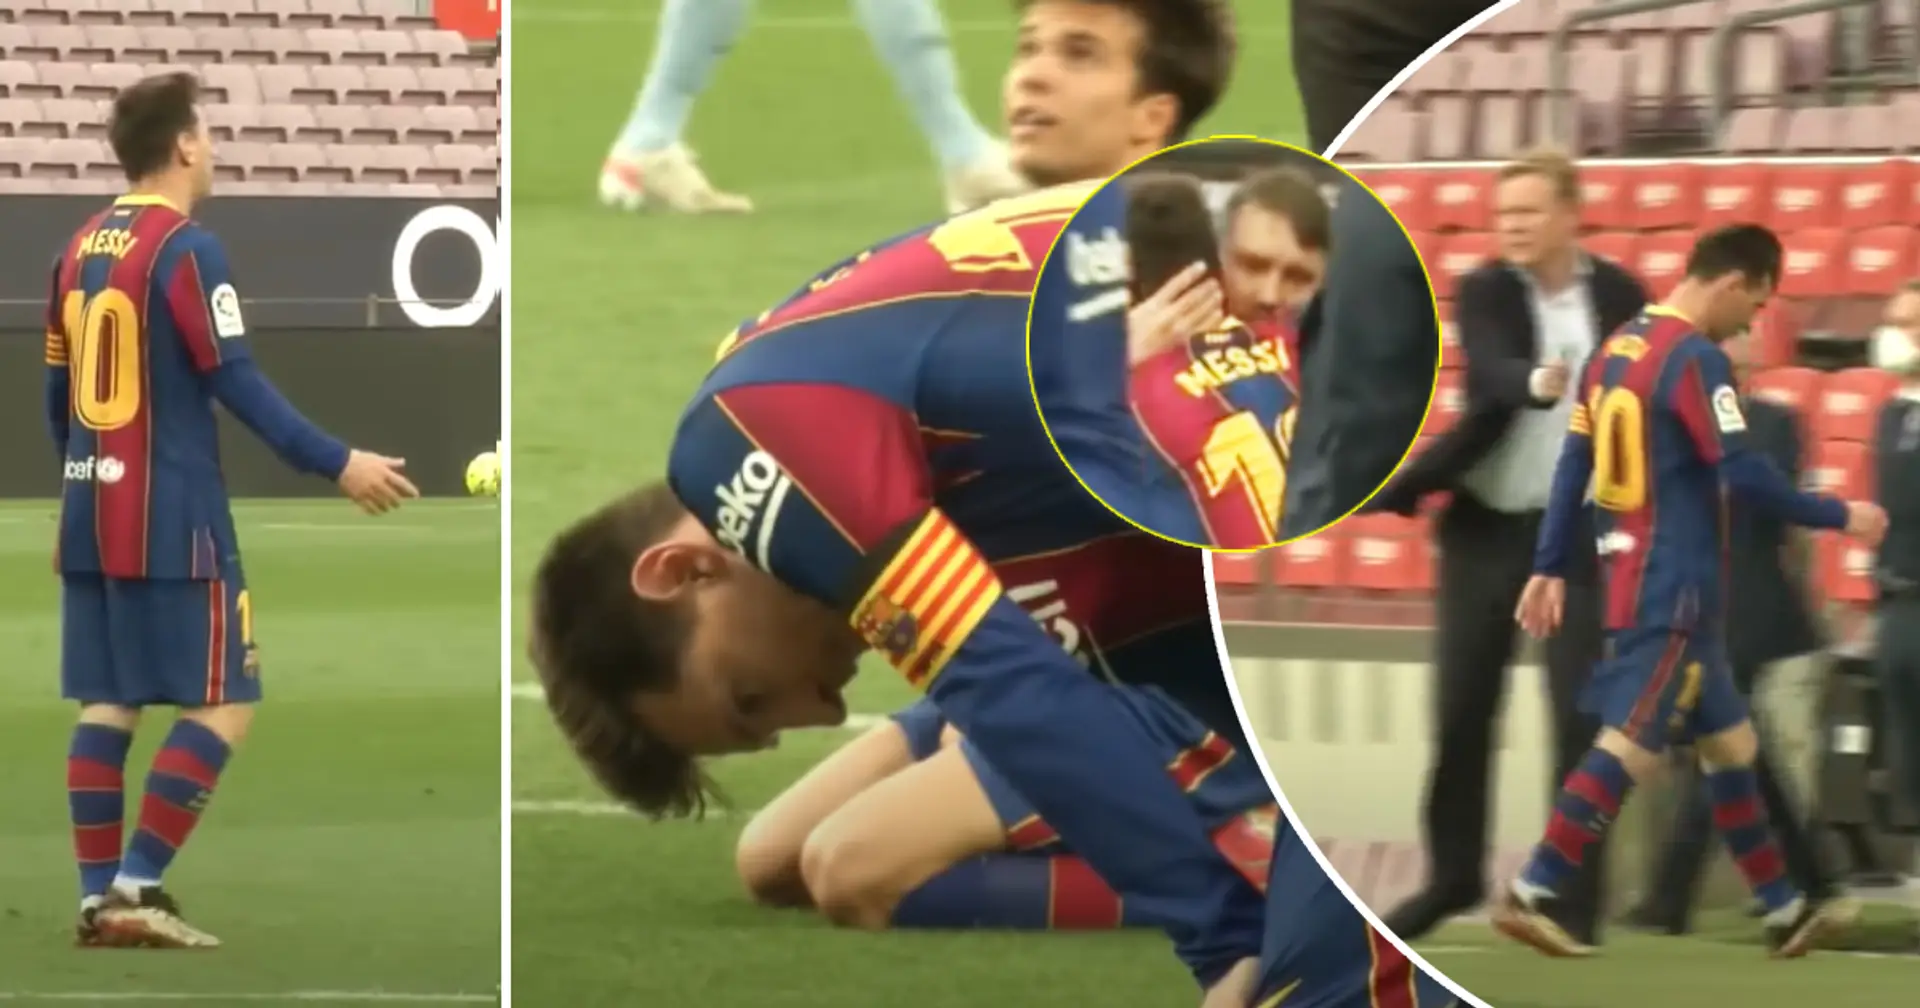 Hugs for rival boss, frustration for Barca teammates: Camera shows Leo Messi's mood in Celta loss